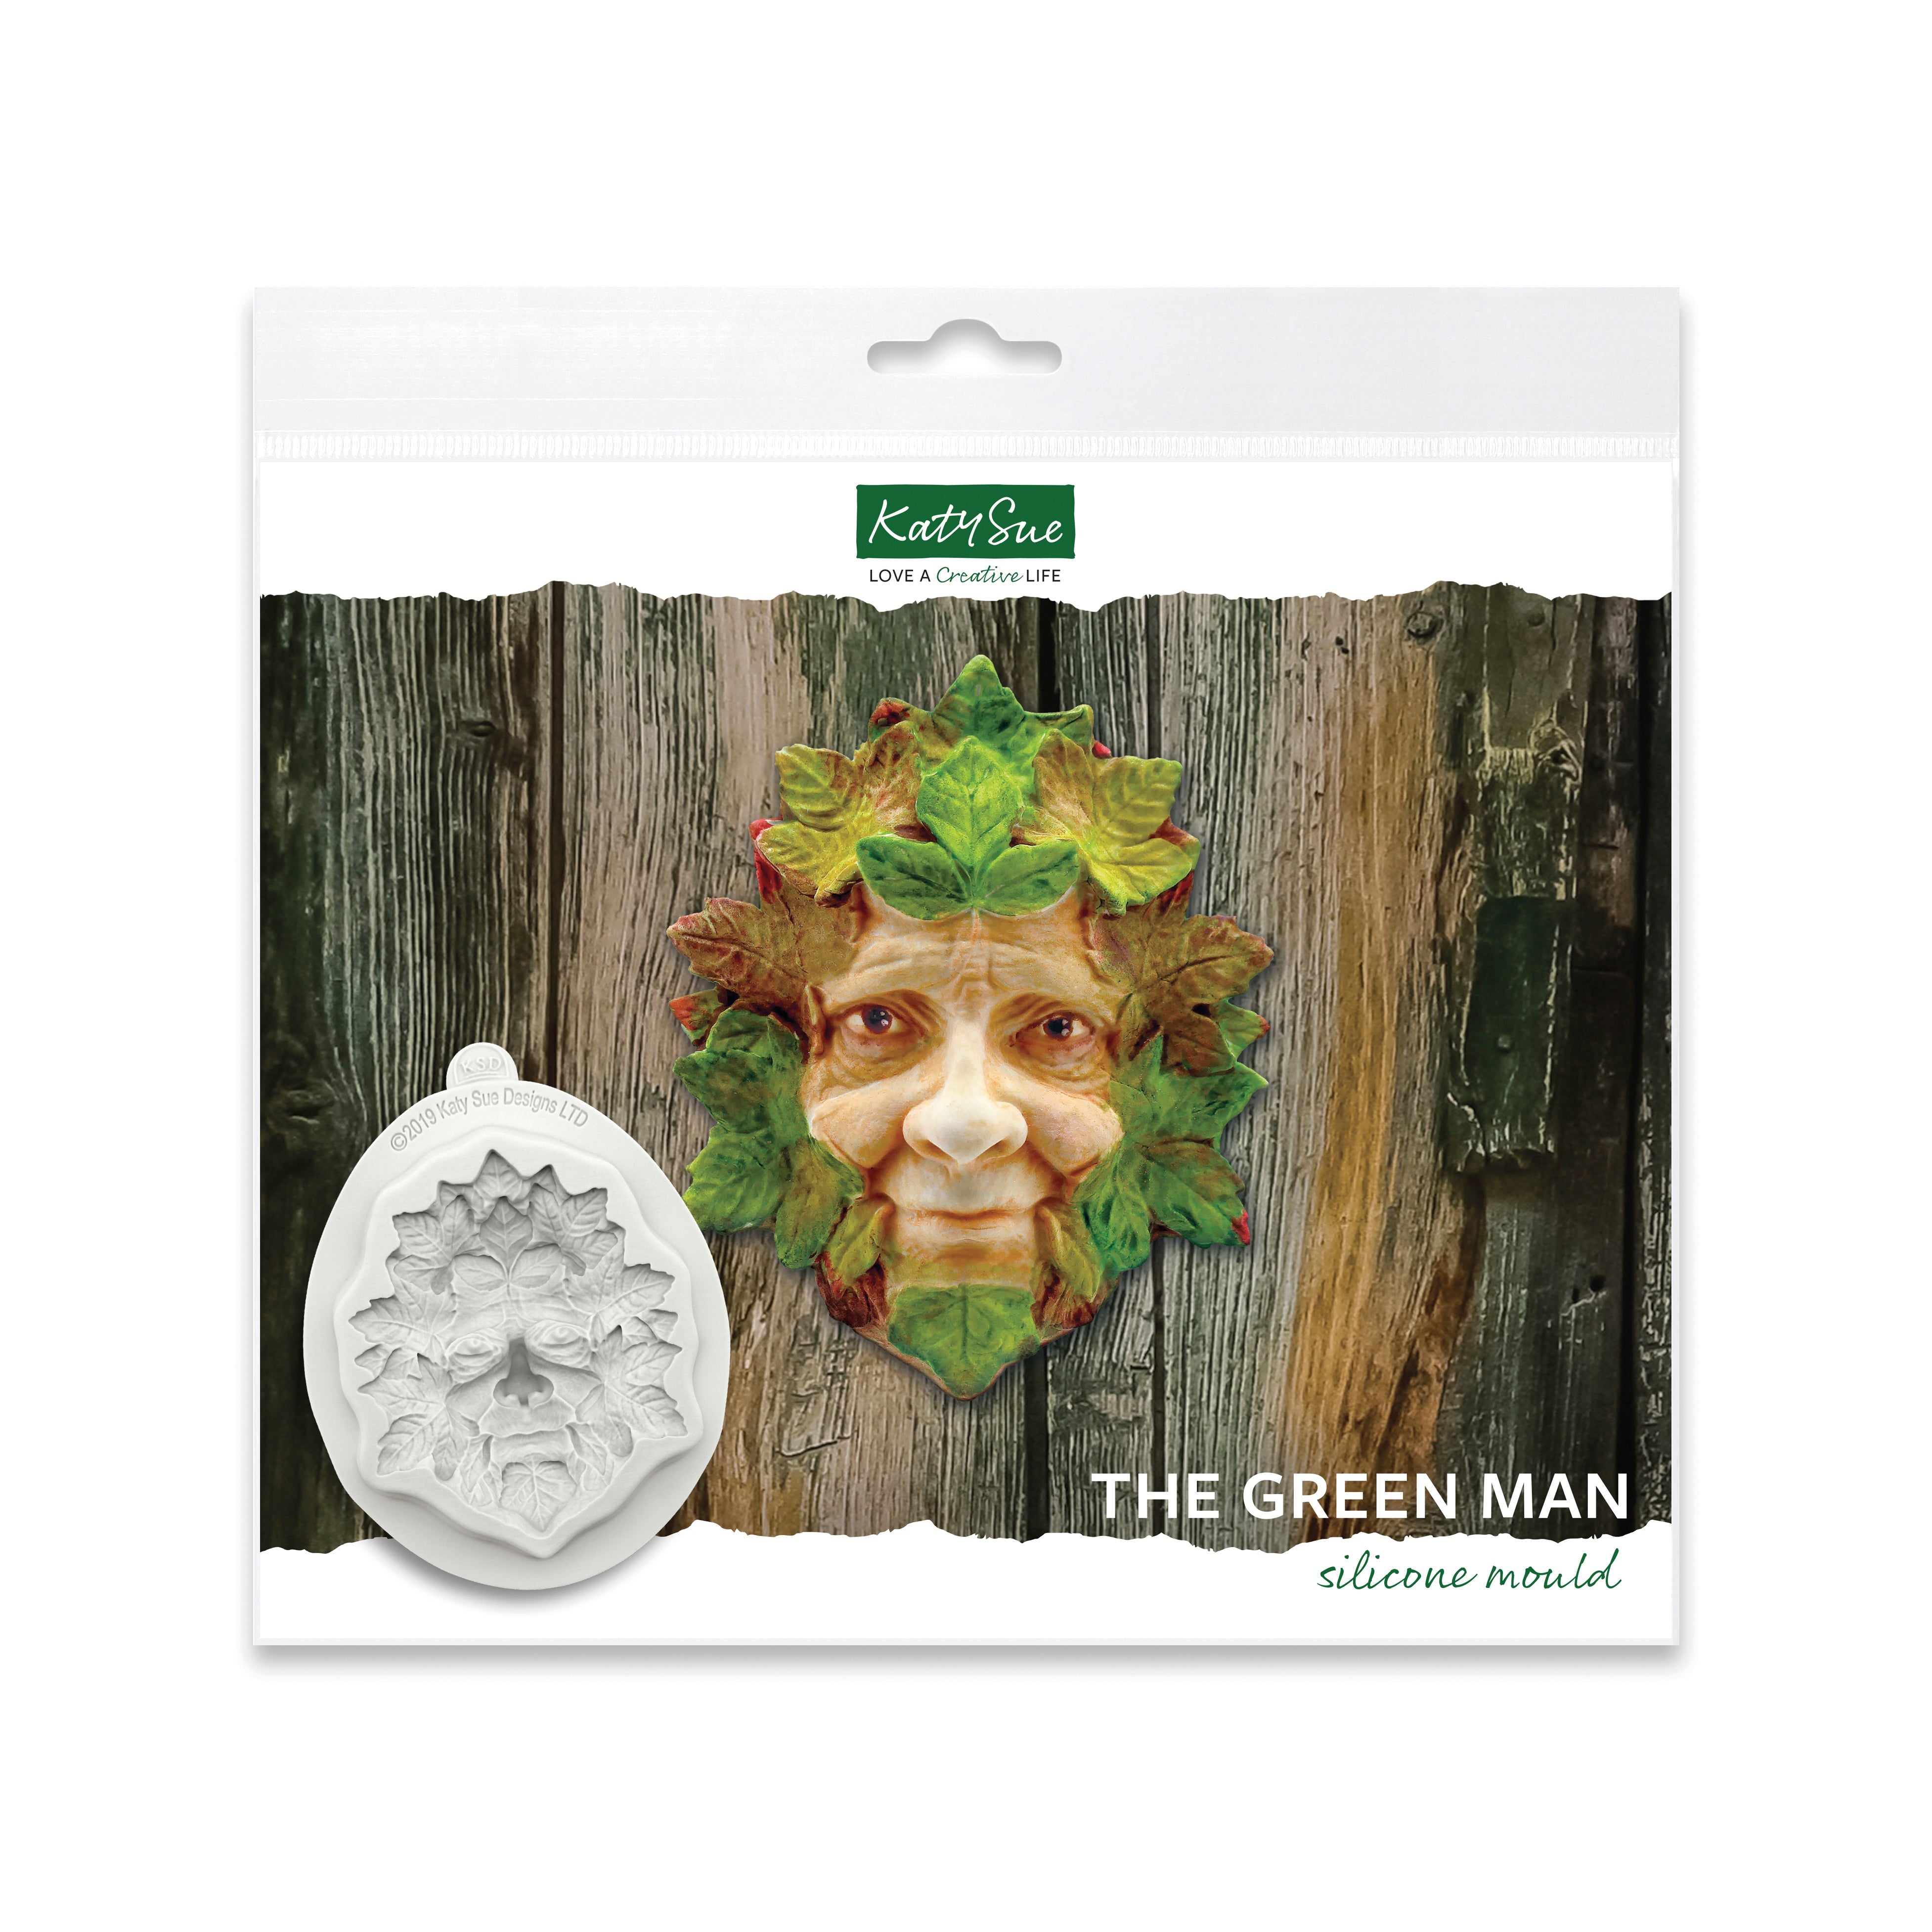 The Green Man Silicone Mould